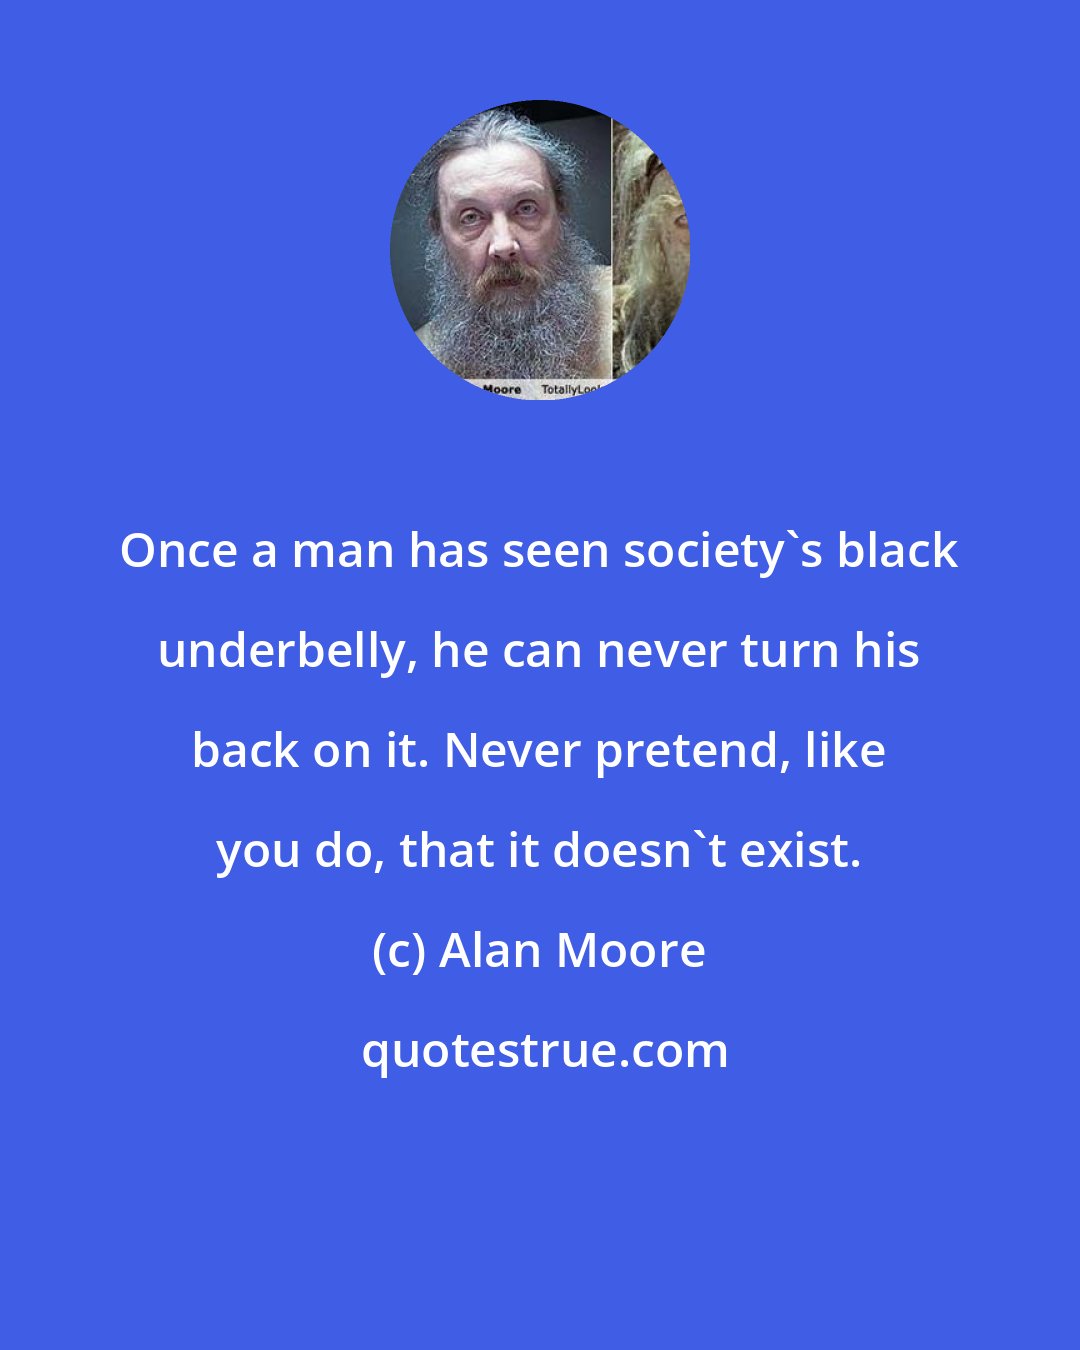 Alan Moore: Once a man has seen society's black underbelly, he can never turn his back on it. Never pretend, like you do, that it doesn't exist.